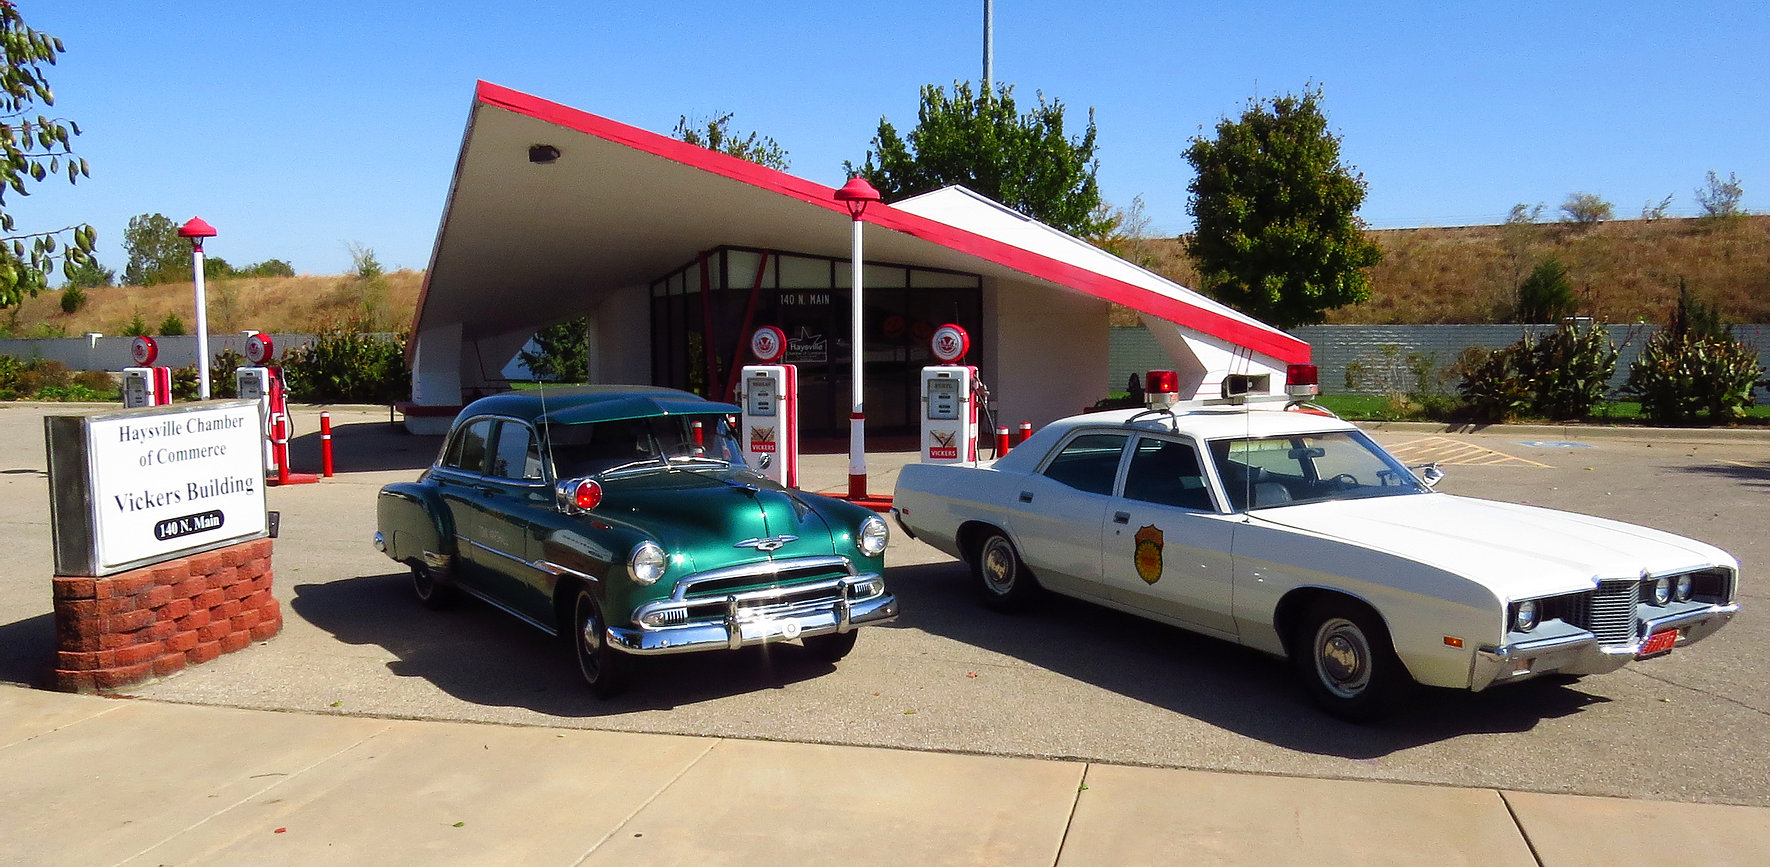 Classic cars sit outside of a unique-looking petroleum service station